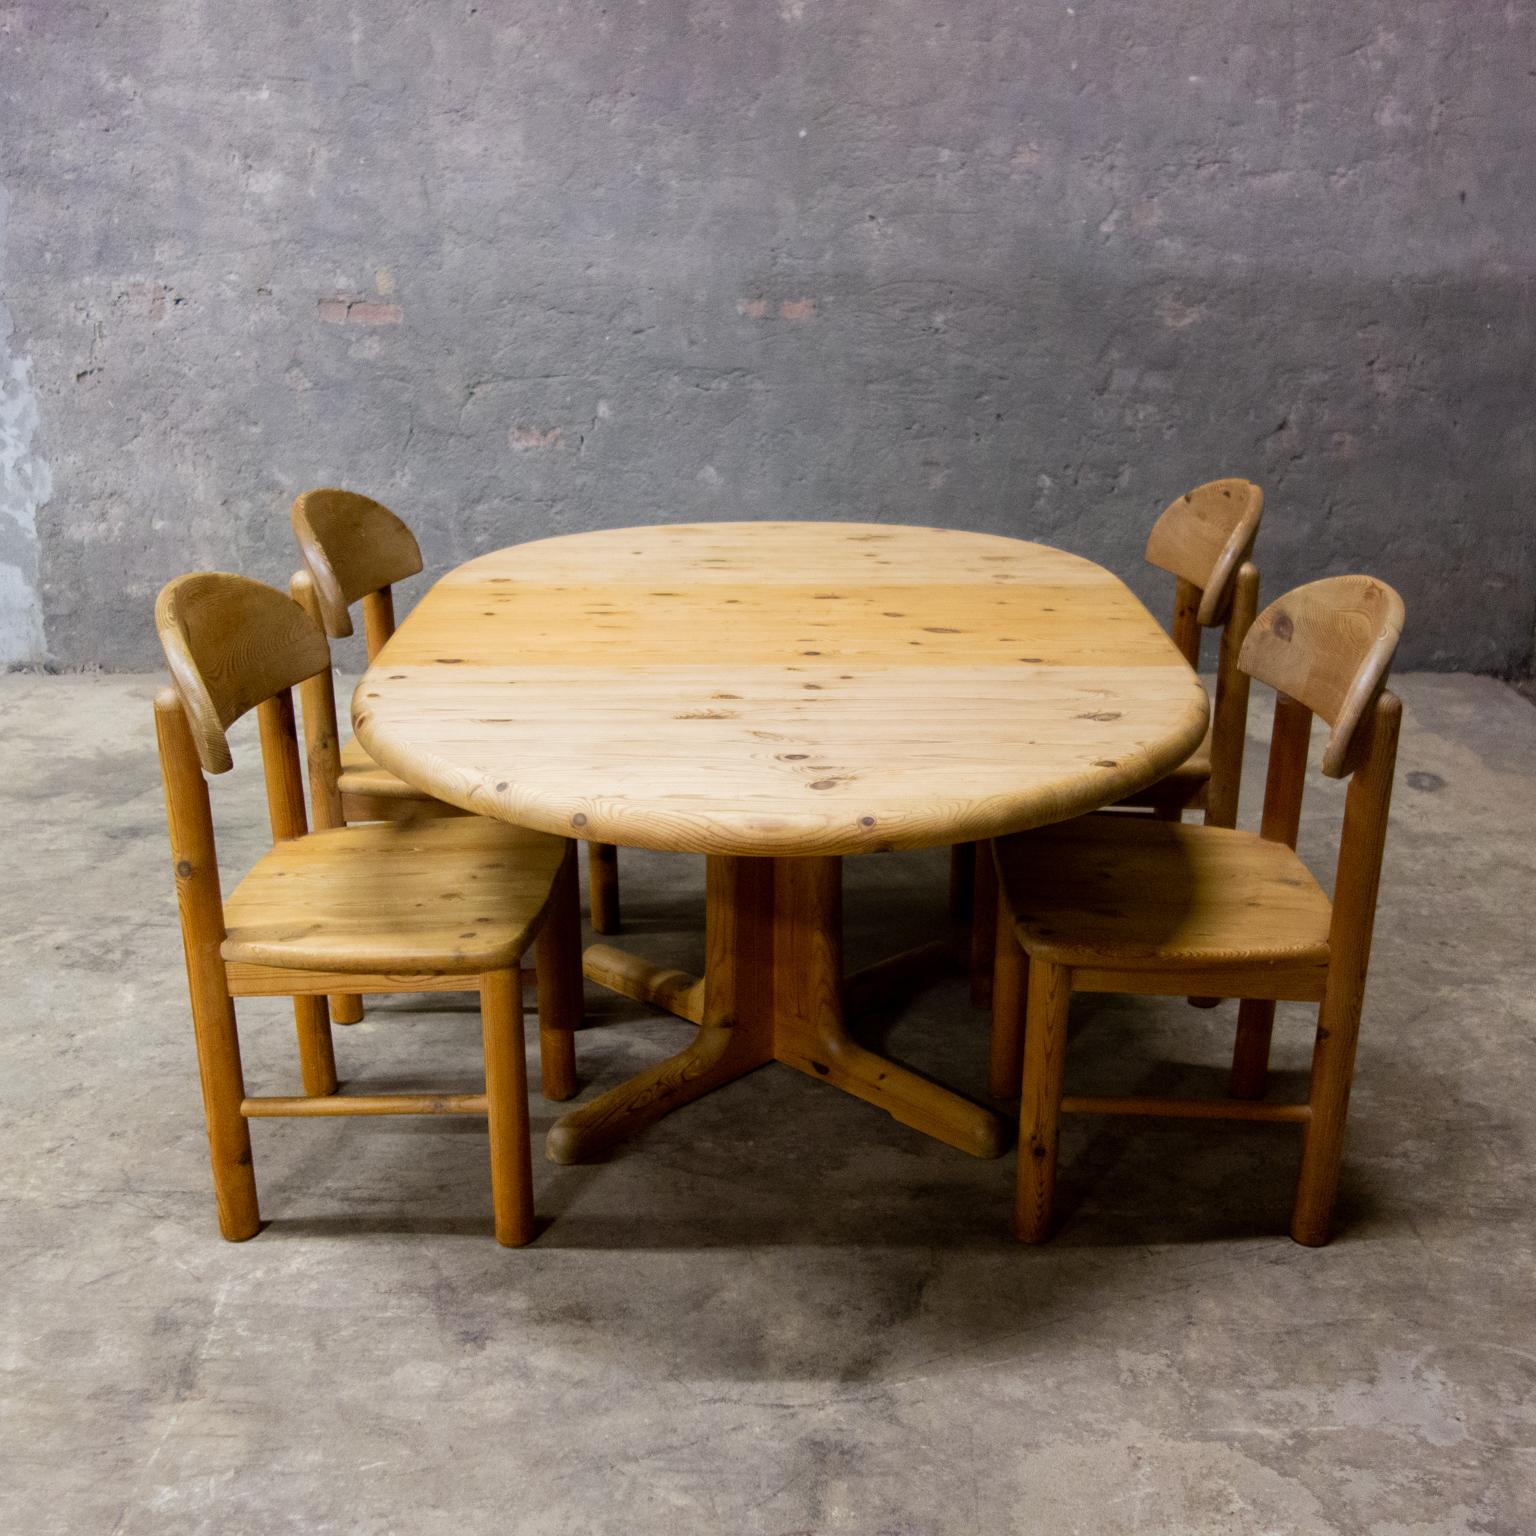 Set of 4 Chairs and Table by Rainer Daumiller for Hirtshal Sawmill, Denmark 1970 1